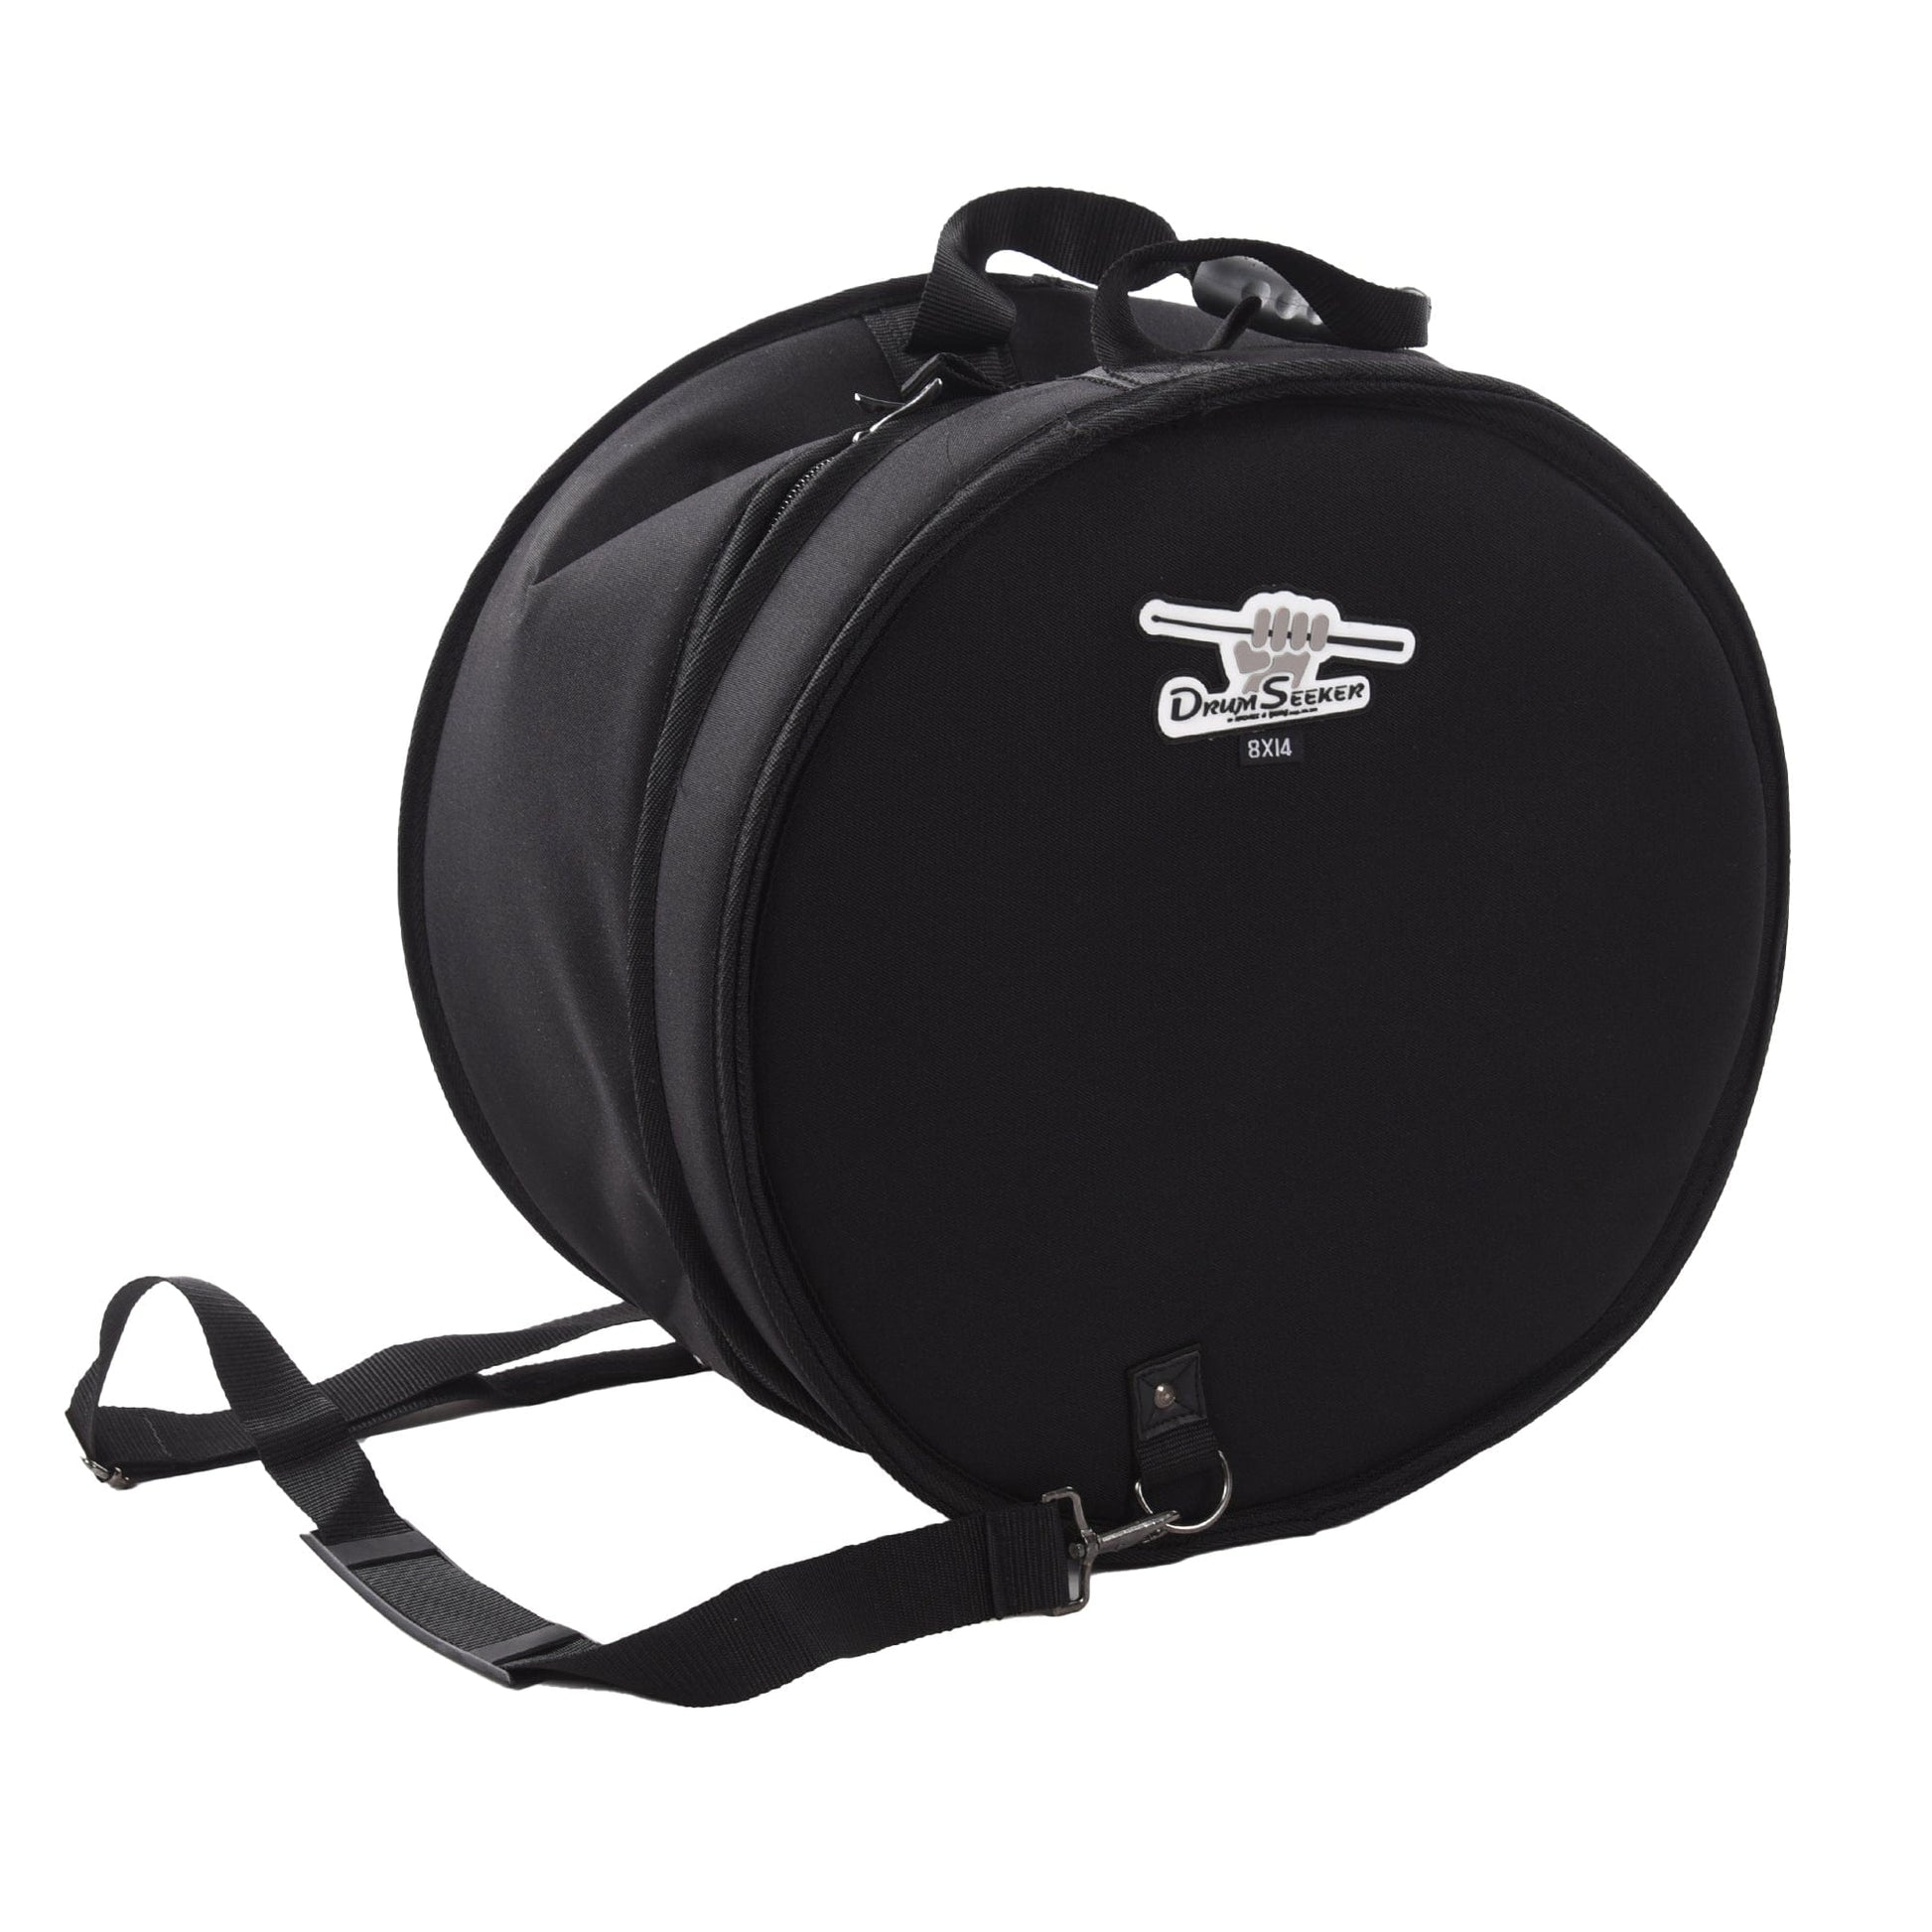 Humes & Berg 8x14 Drum Seeker Snare Drum Bag Drums and Percussion / Parts and Accessories / Cases and Bags